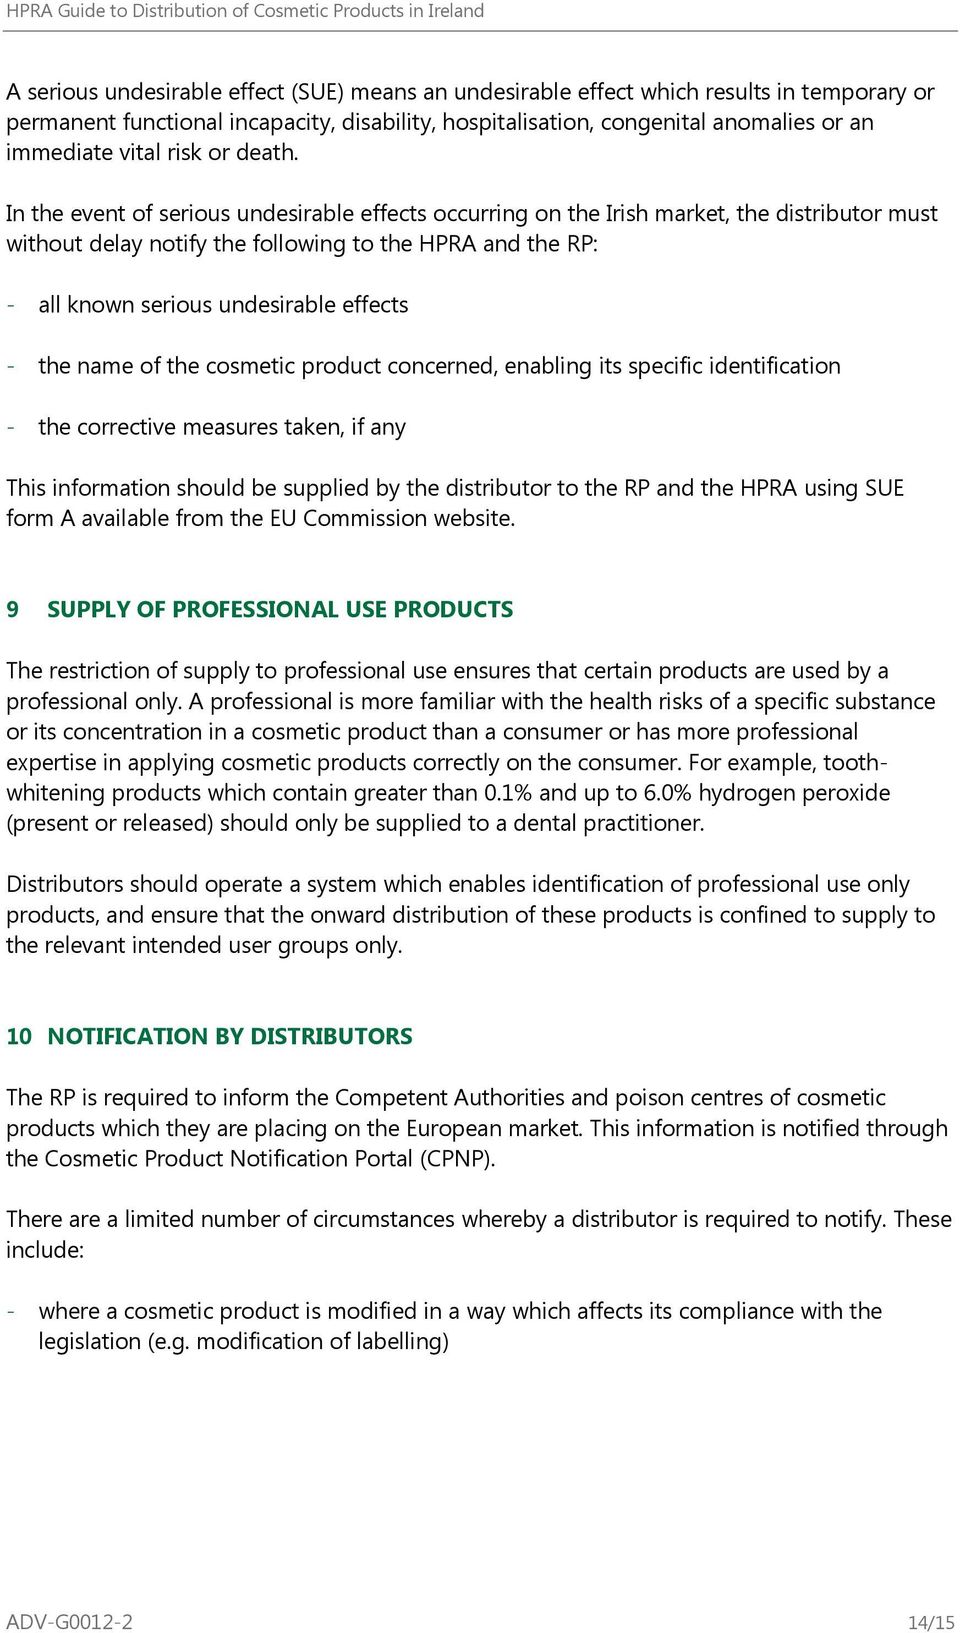 In the event of serious undesirable effects occurring on the Irish market, the distributor must without delay notify the following to the HPRA and the RP: - all known serious undesirable effects -